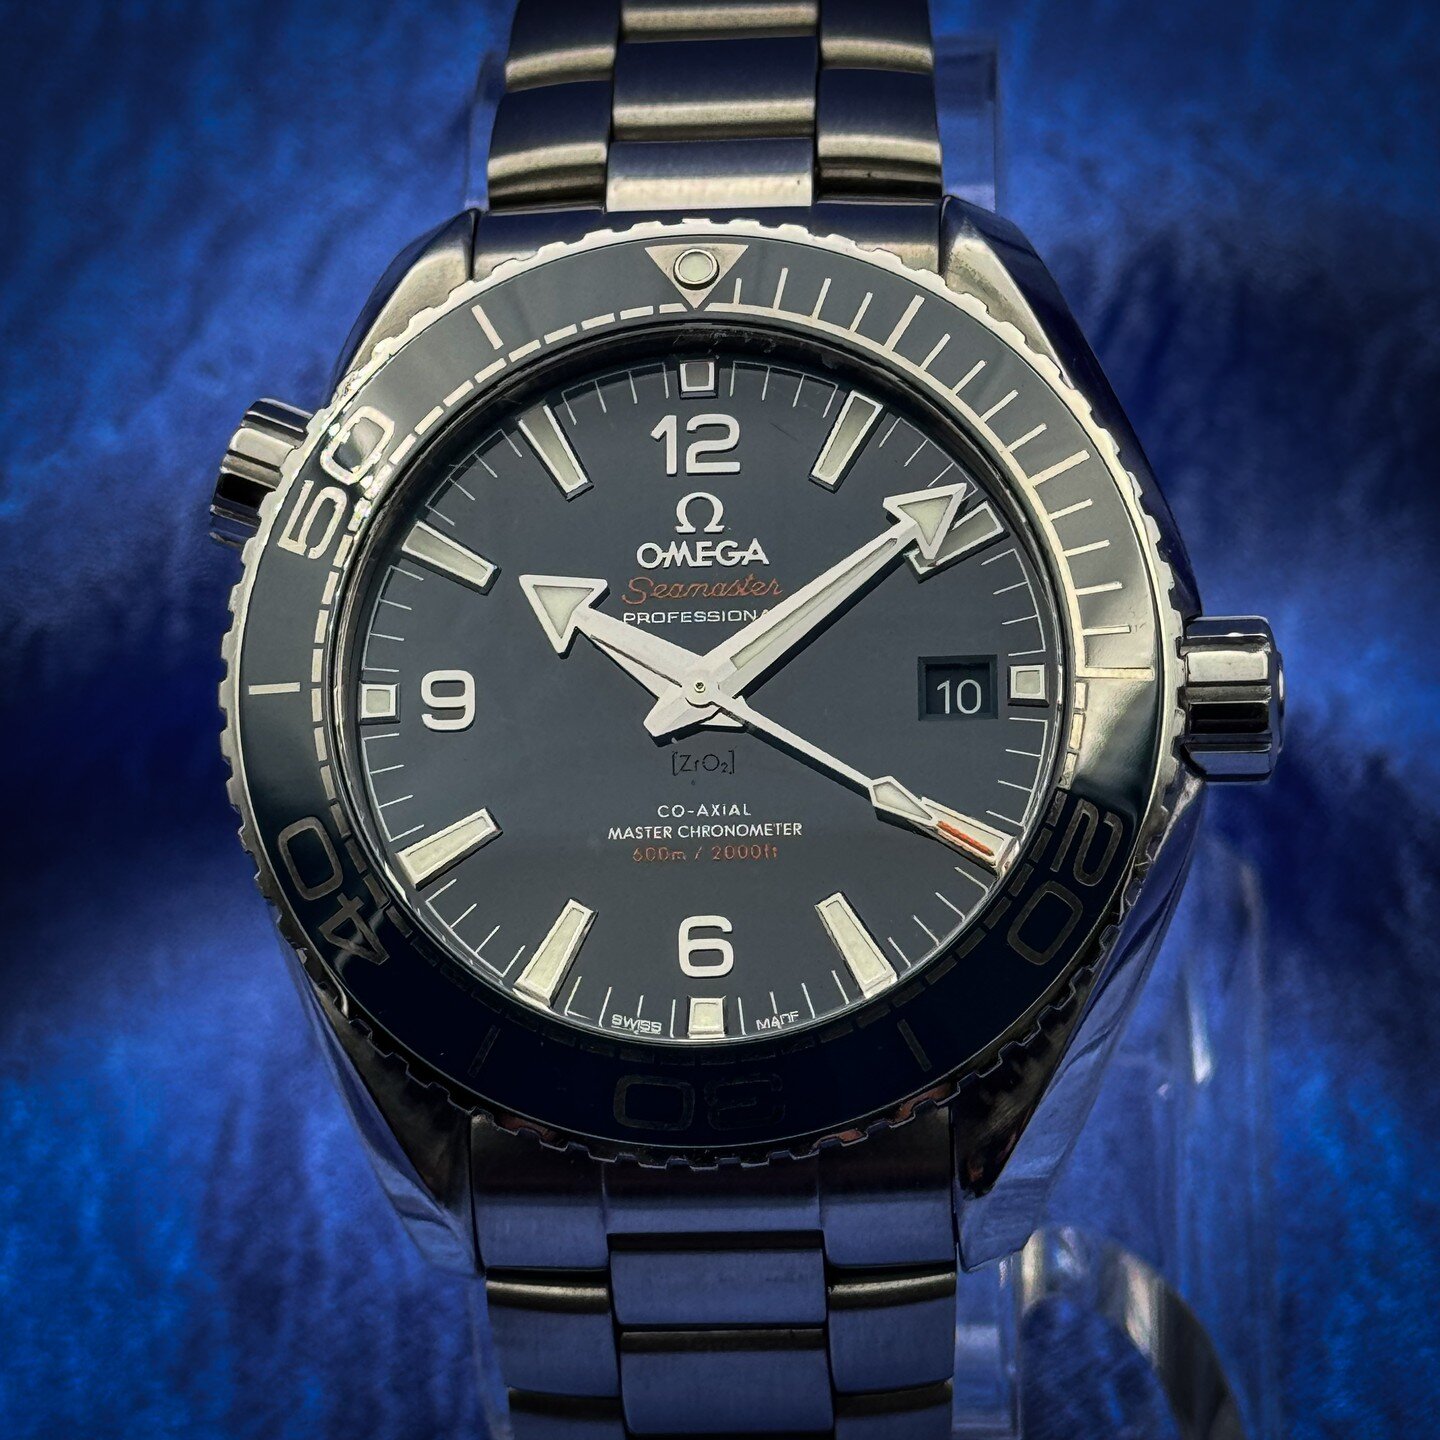 The OMEGA Seamaster, a luxurious men's wristwatch that exudes style and sophistication. The Seamaster is a tried and true design in the Omega lineup that was first introduced in 1948. This Swiss-made timepiece features a unidirectional rotating bezel